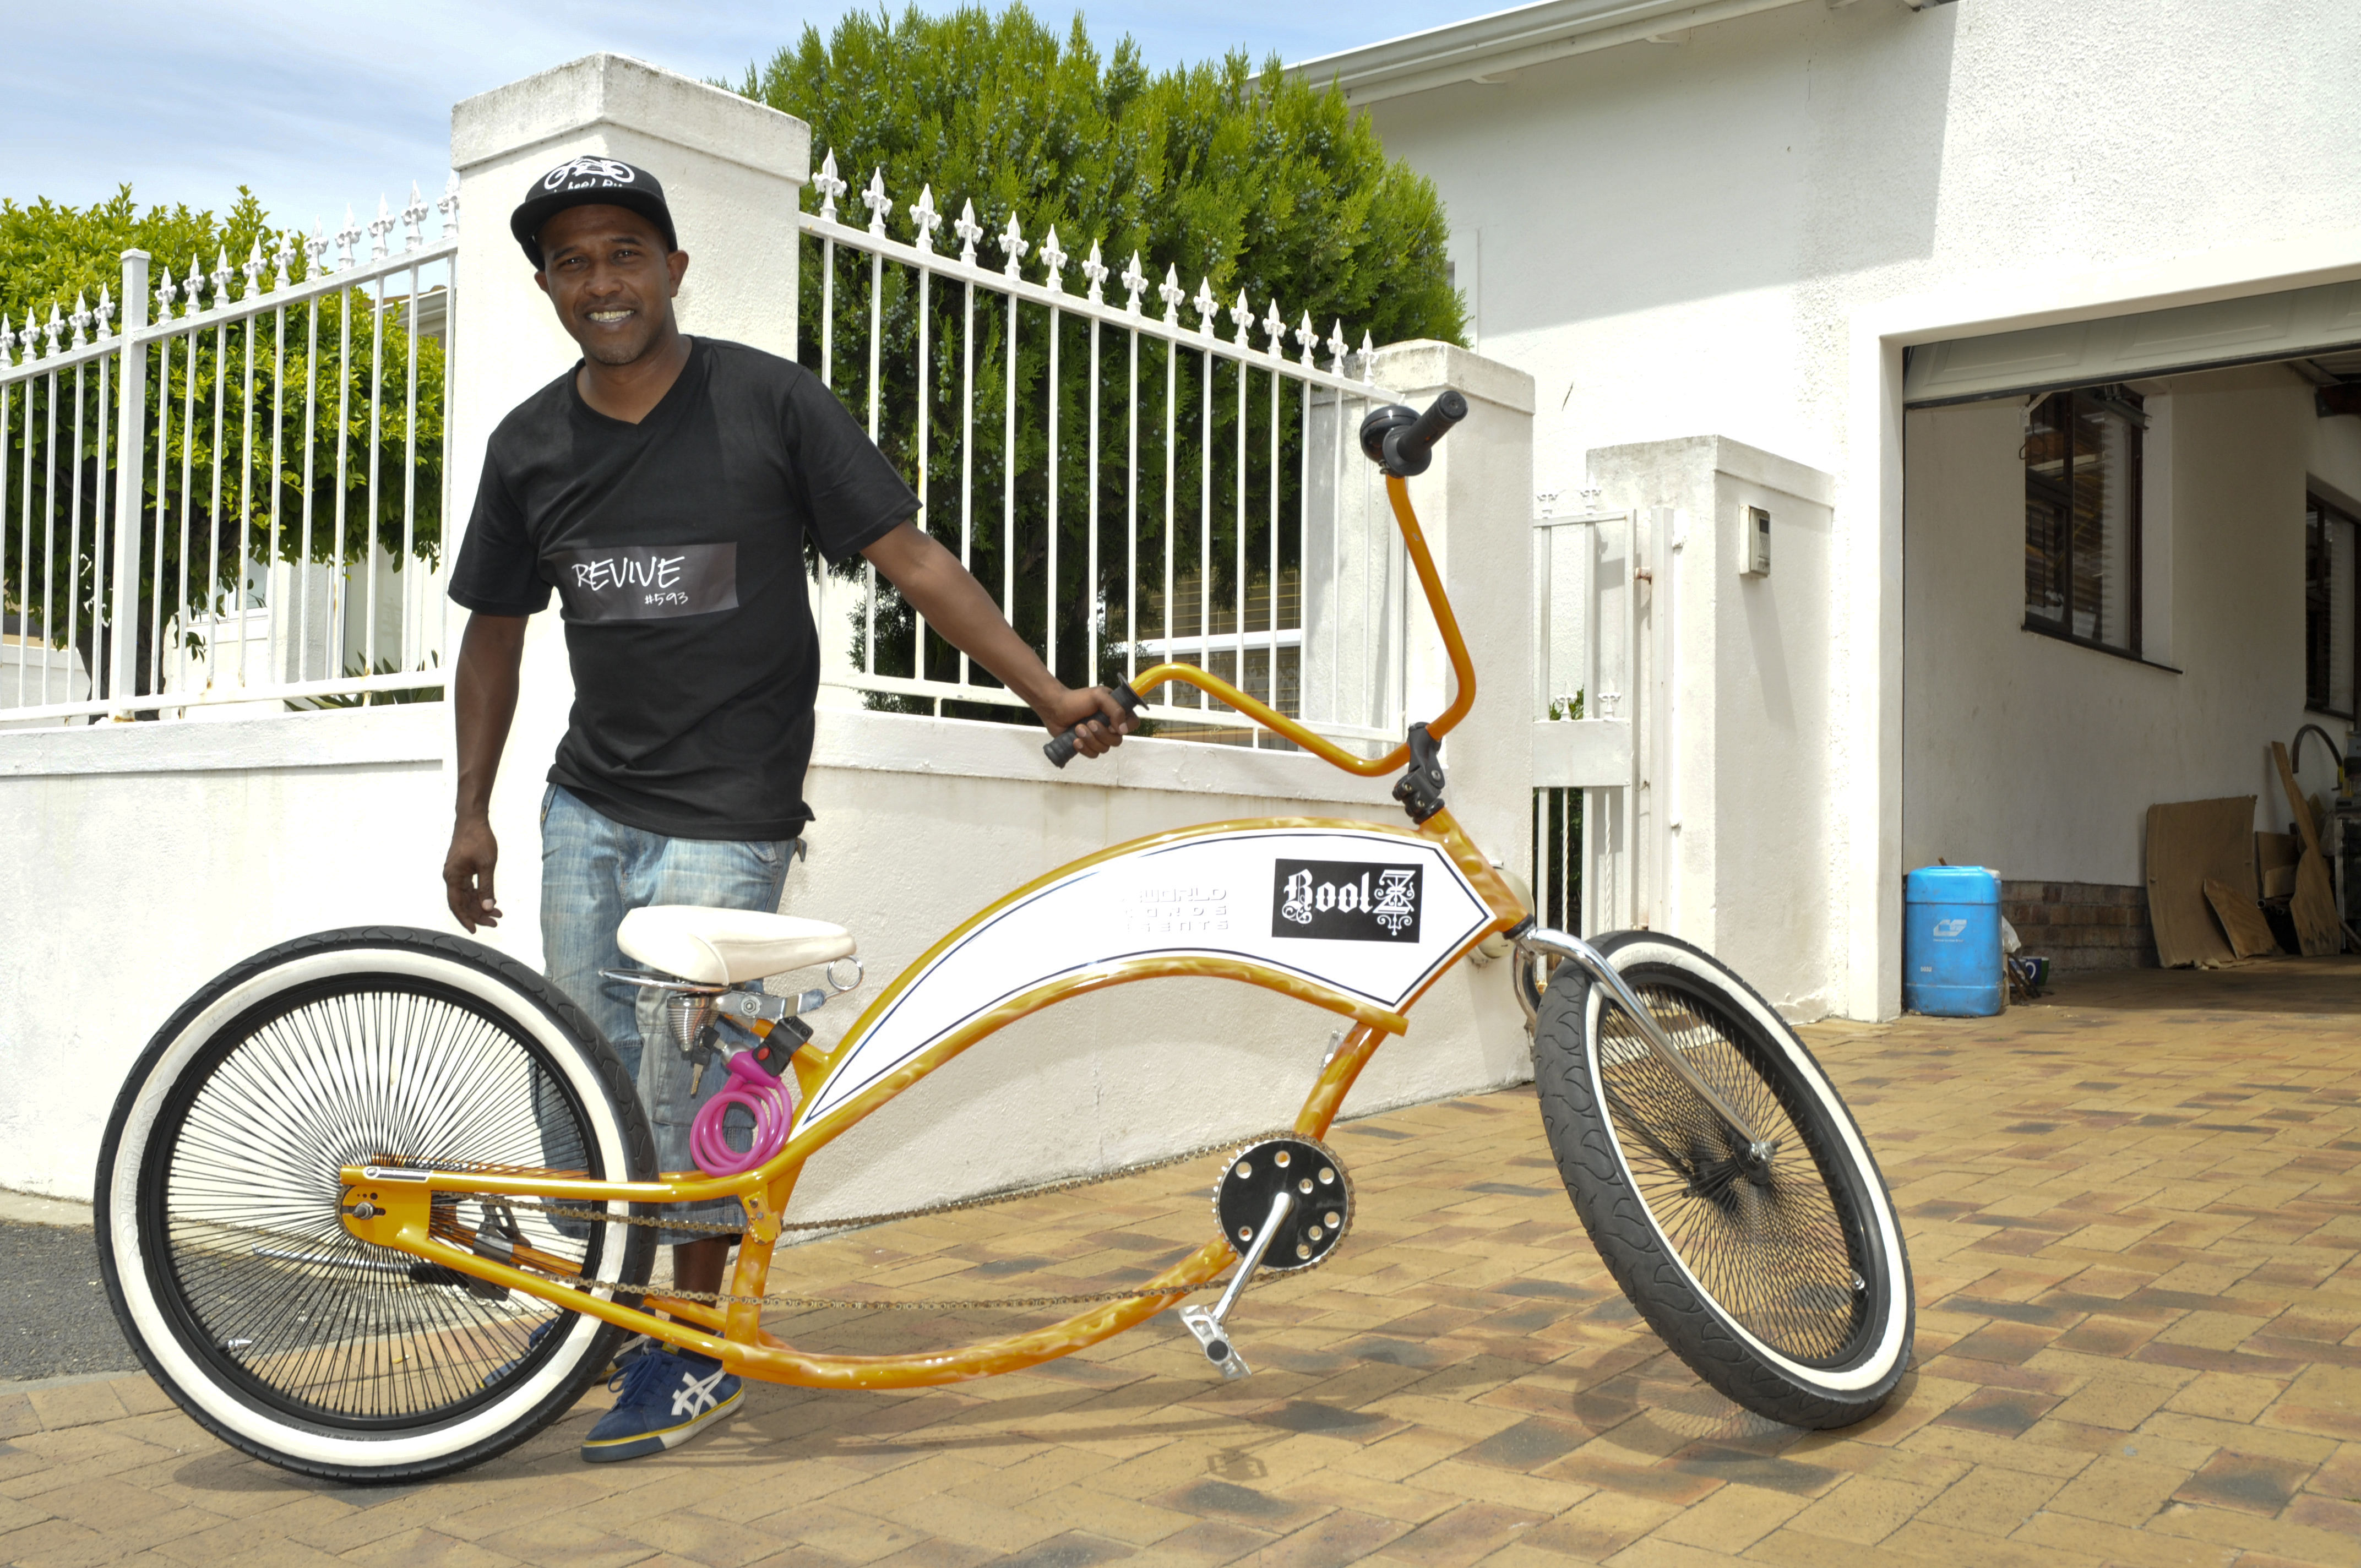 Cape Town entrepreneur finds his niche in the customised bike market